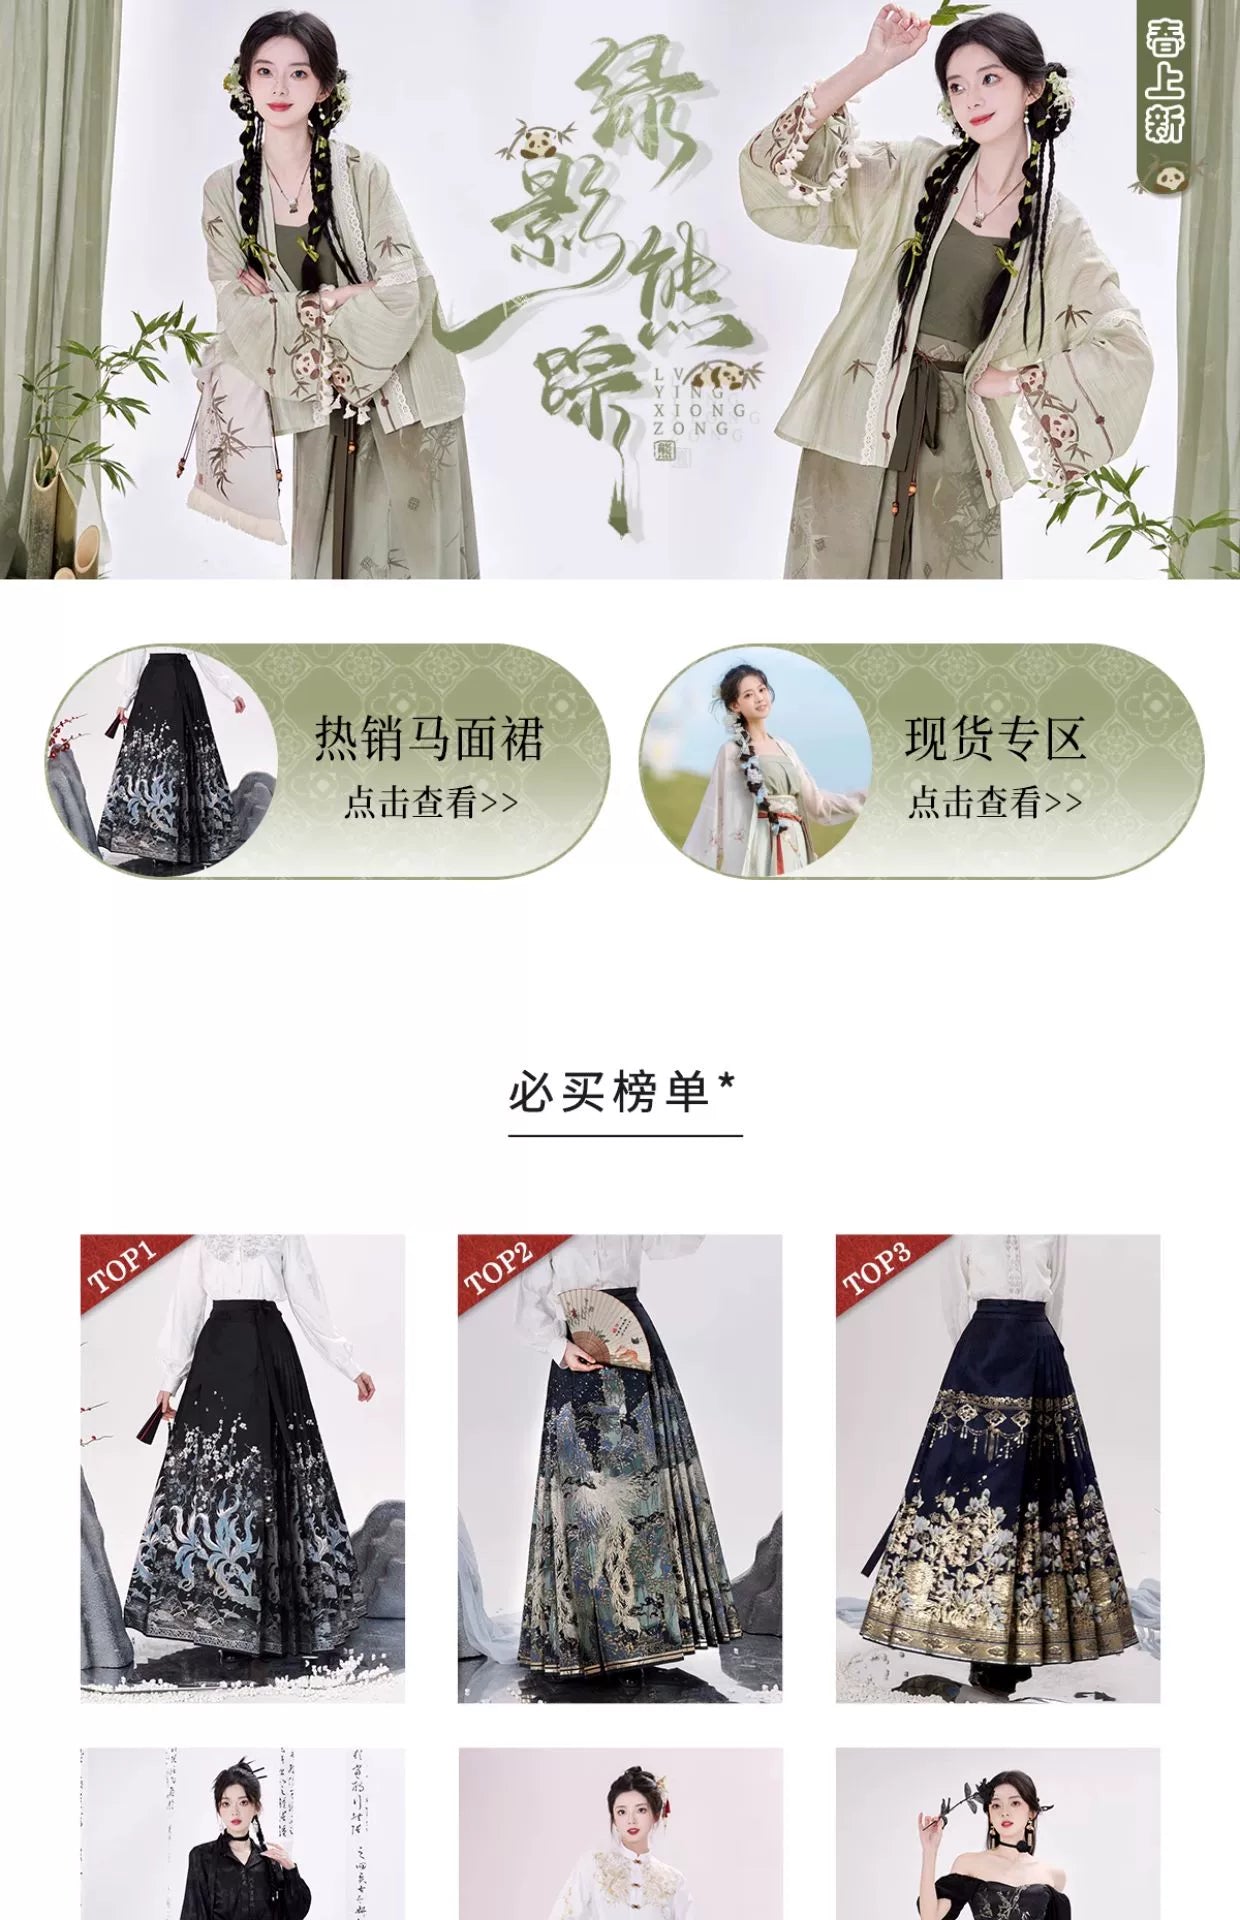 Song Dynasty Heavenly Silk Long Shirt, Cotton Hanging Strap Spinning Skirt